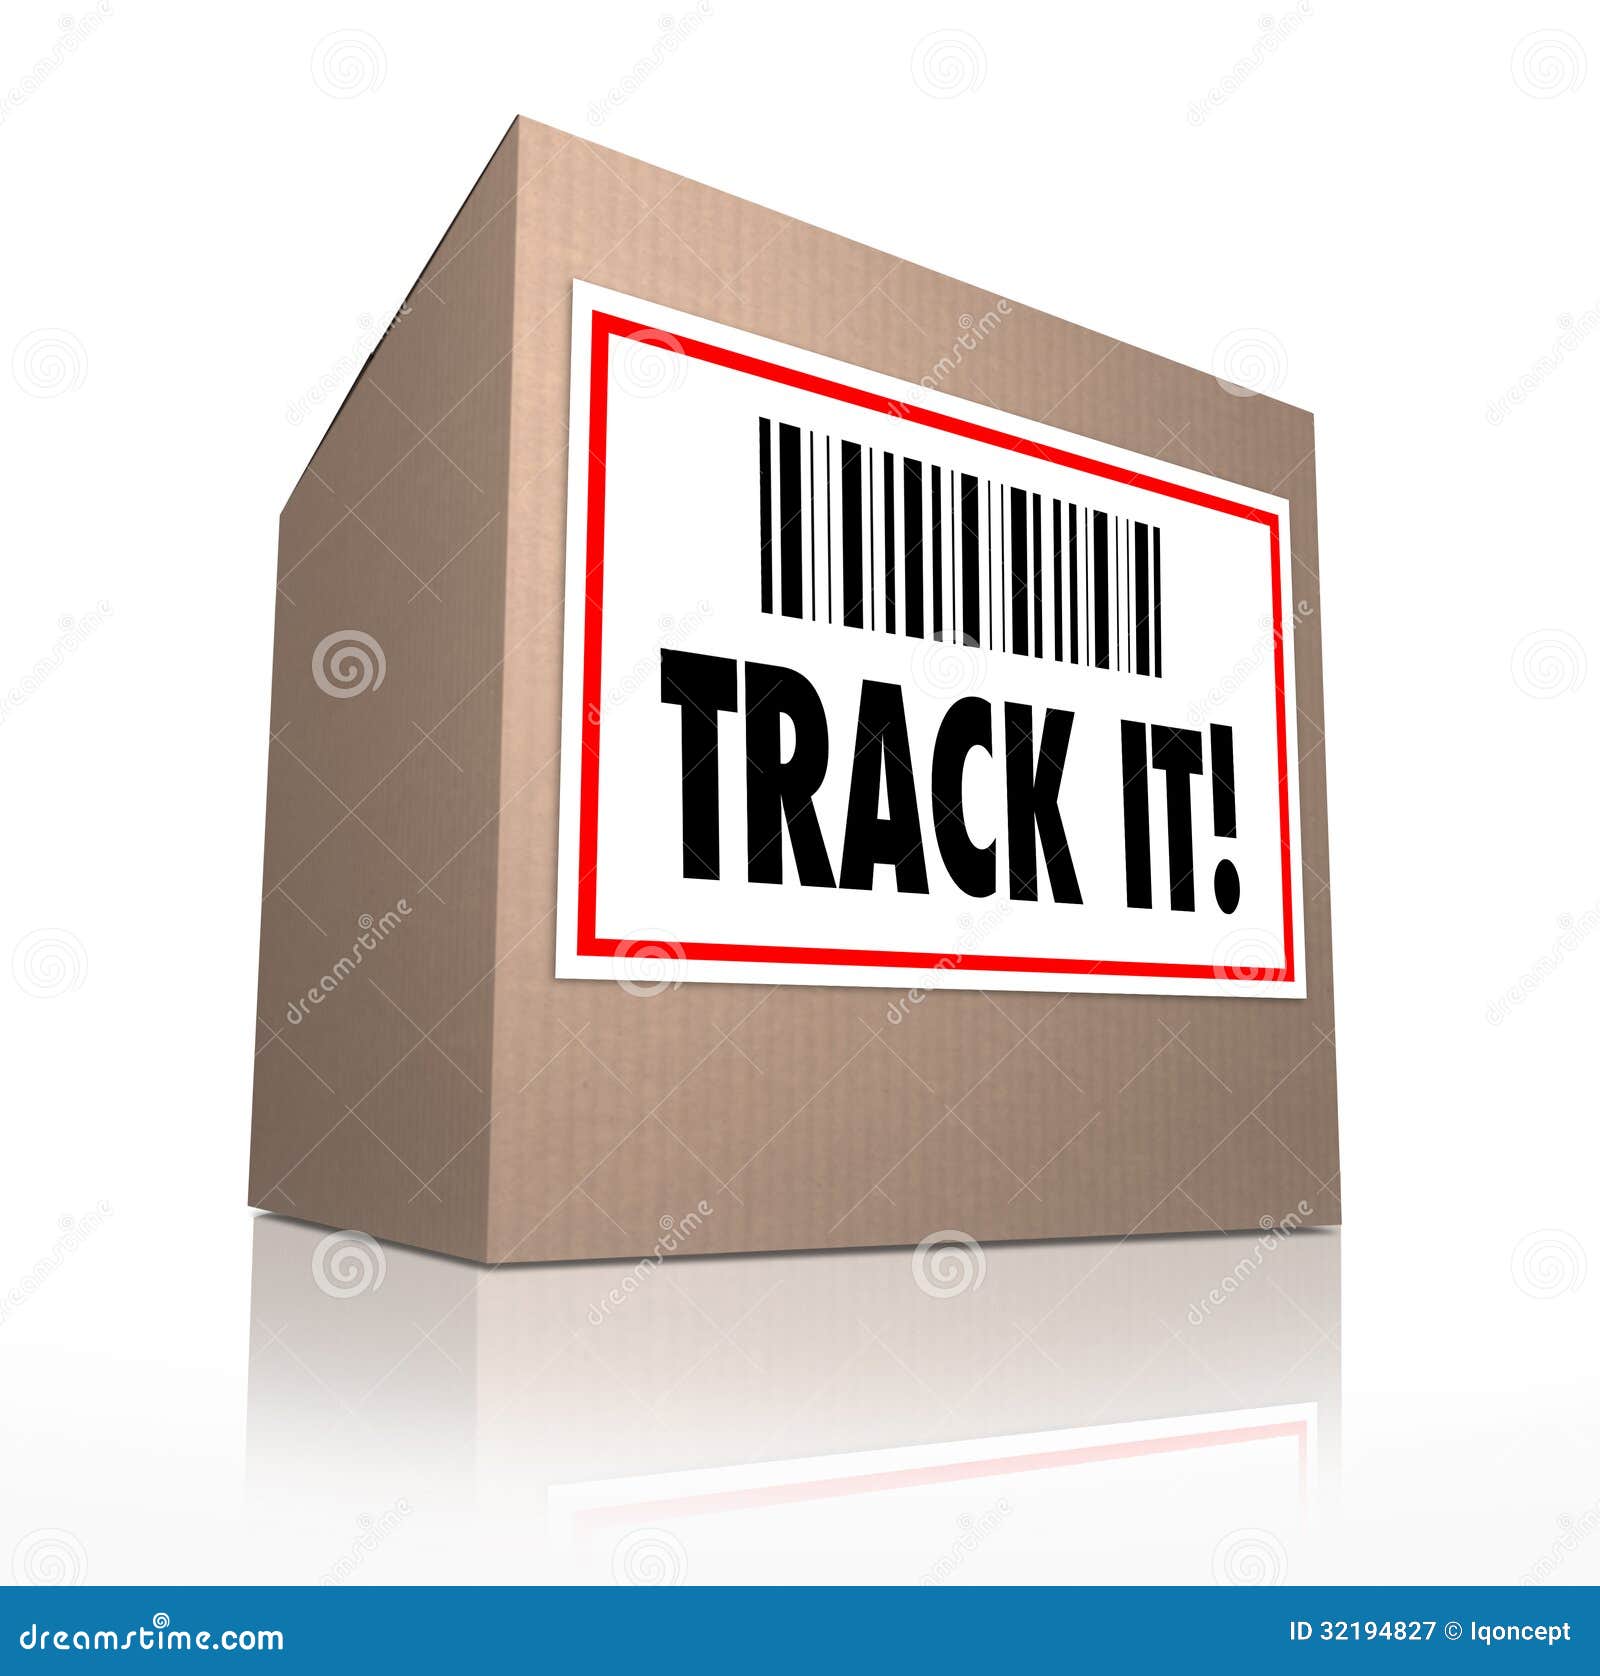 track it words package tracking shipment logistics